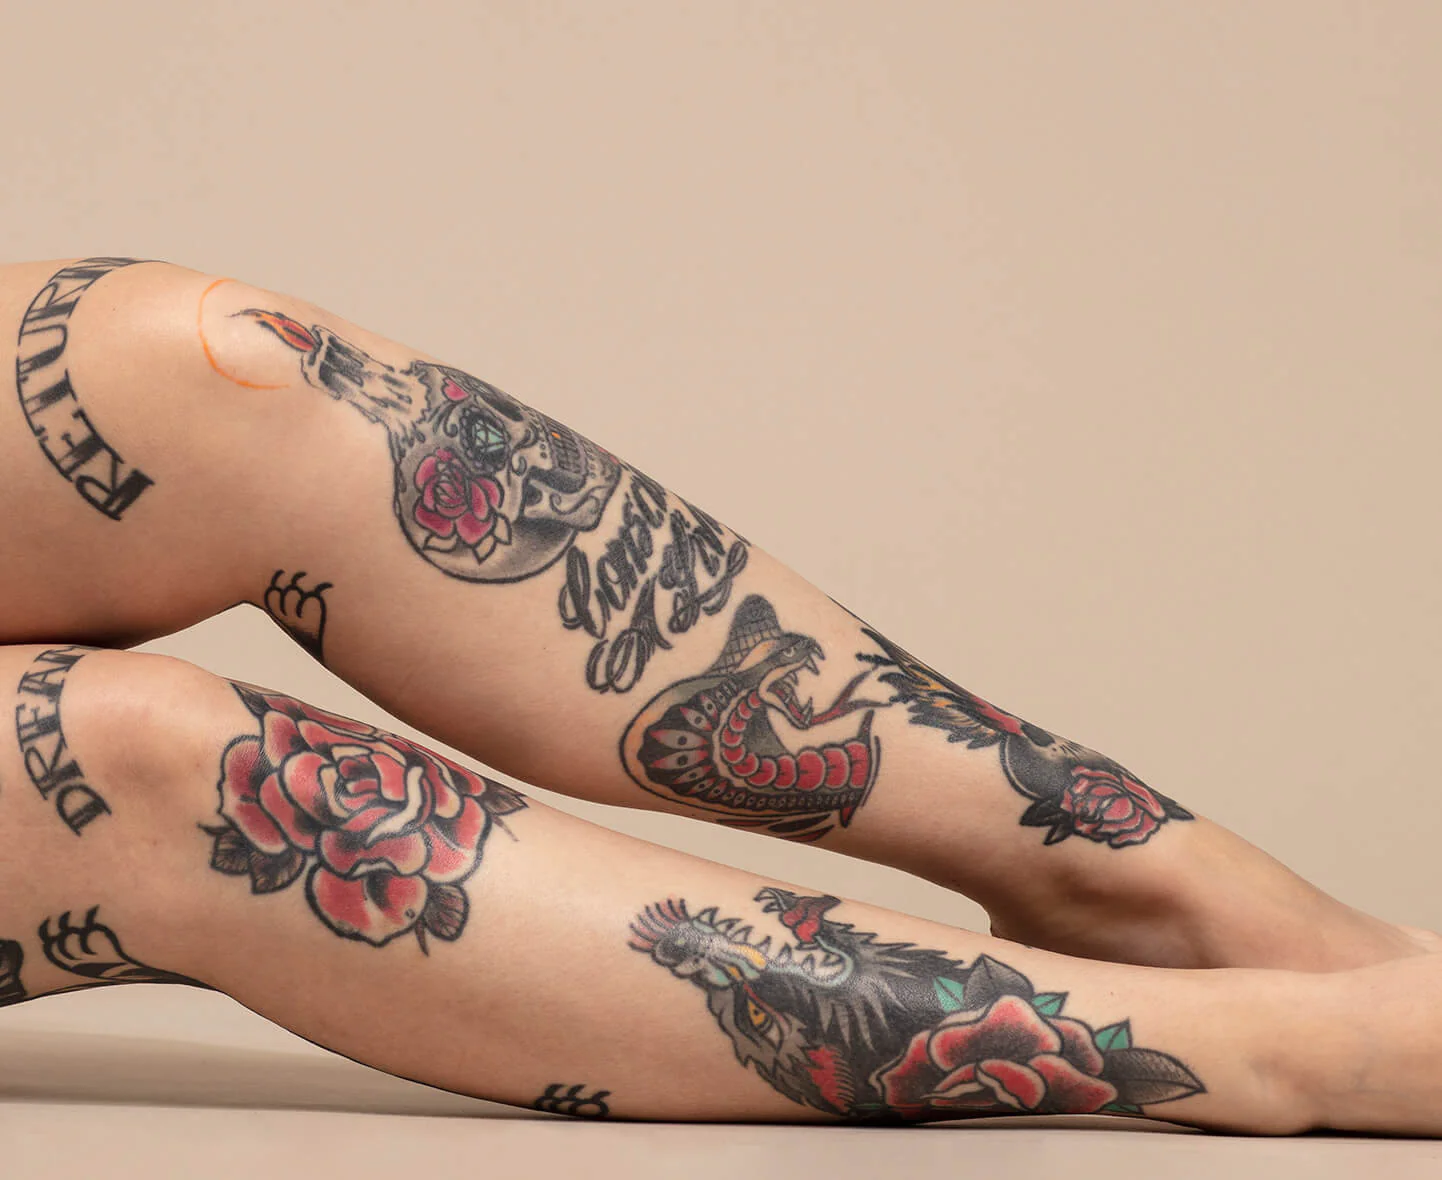 What You Should Expect In Your Next Laser Tattoo Removal